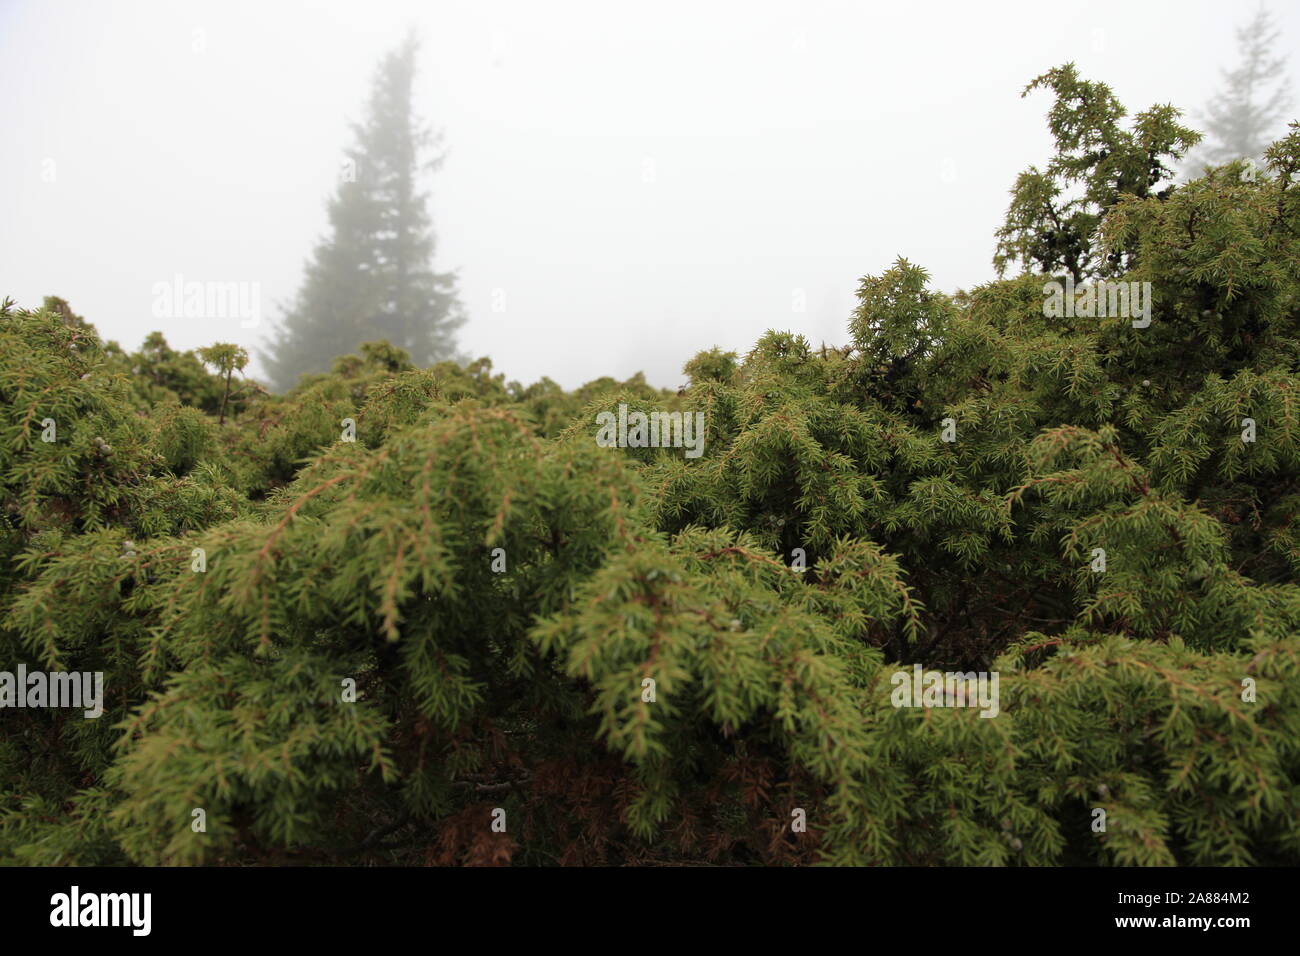 Juniperus communis with spruce trees in the mist Stock Photo